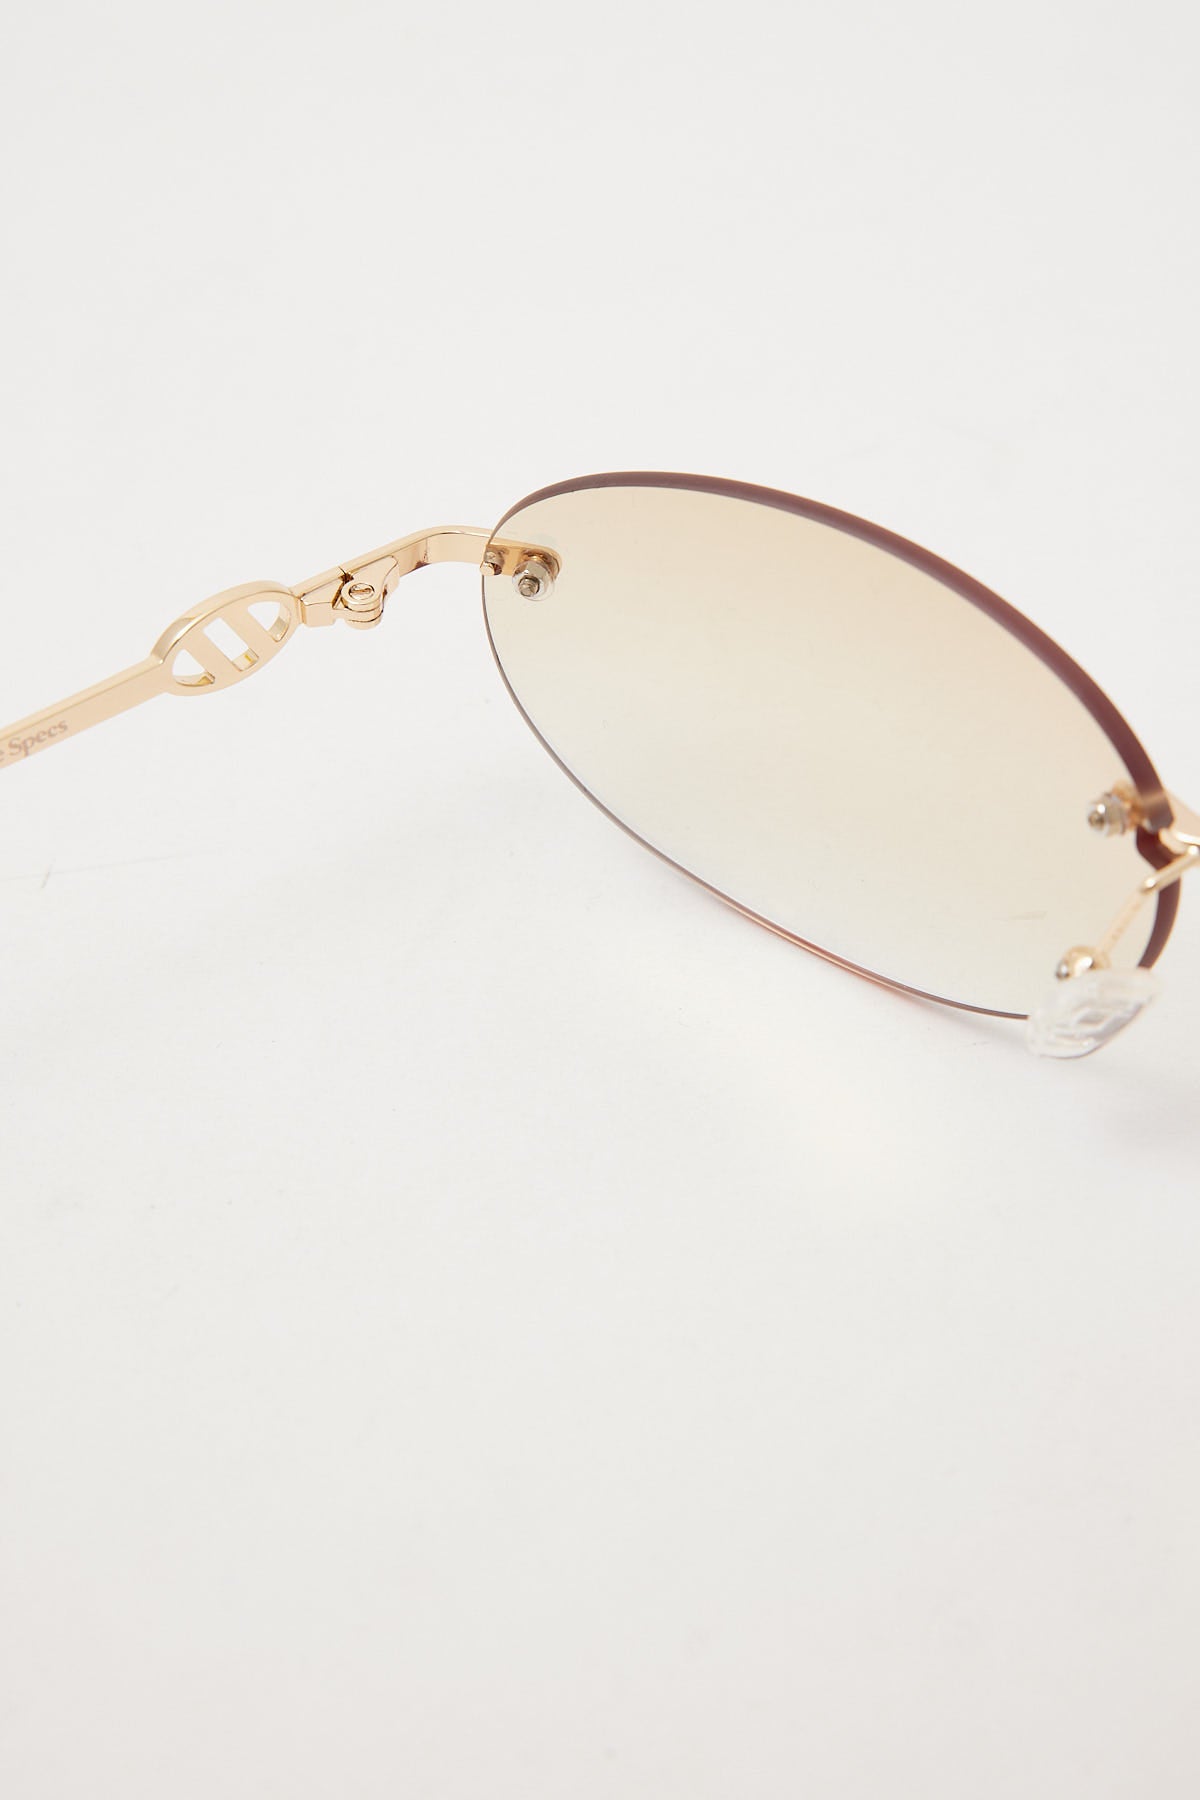 Le Specs Slinky Gold